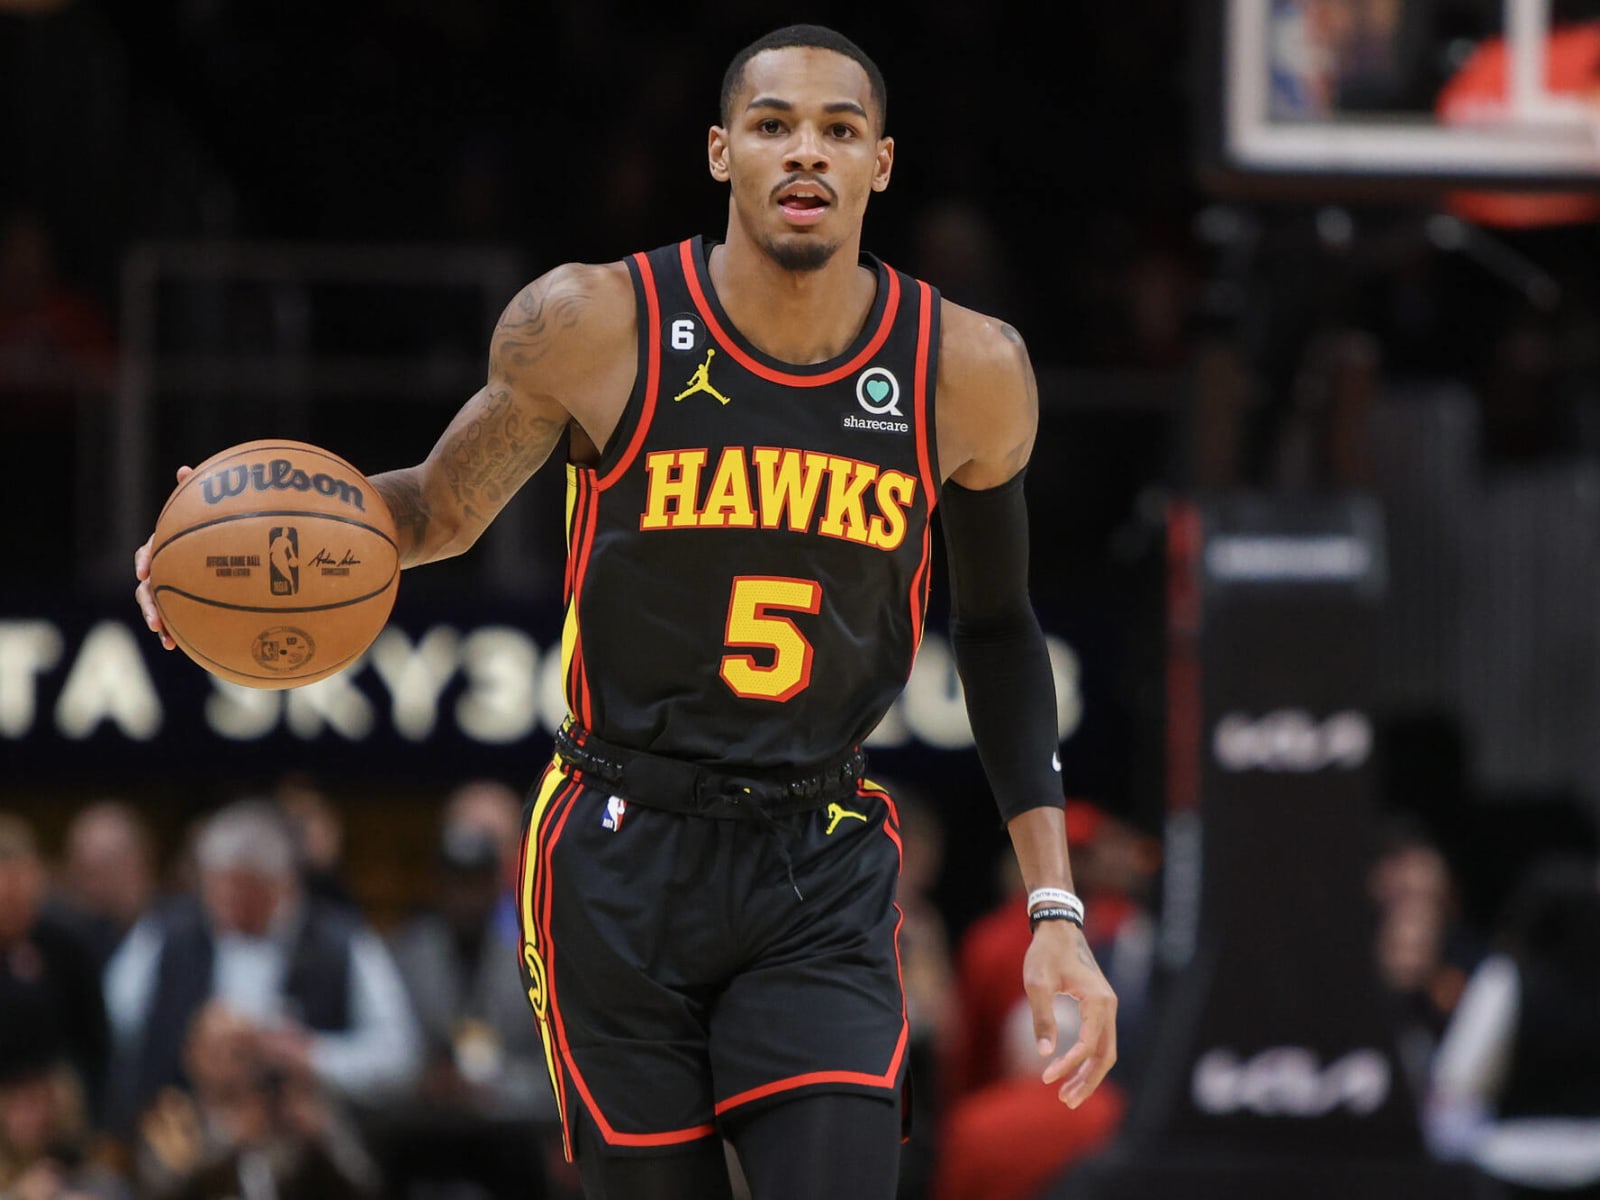 Hawks All-Star guard Dejounte Murray out multiple weeks with ankle sprain